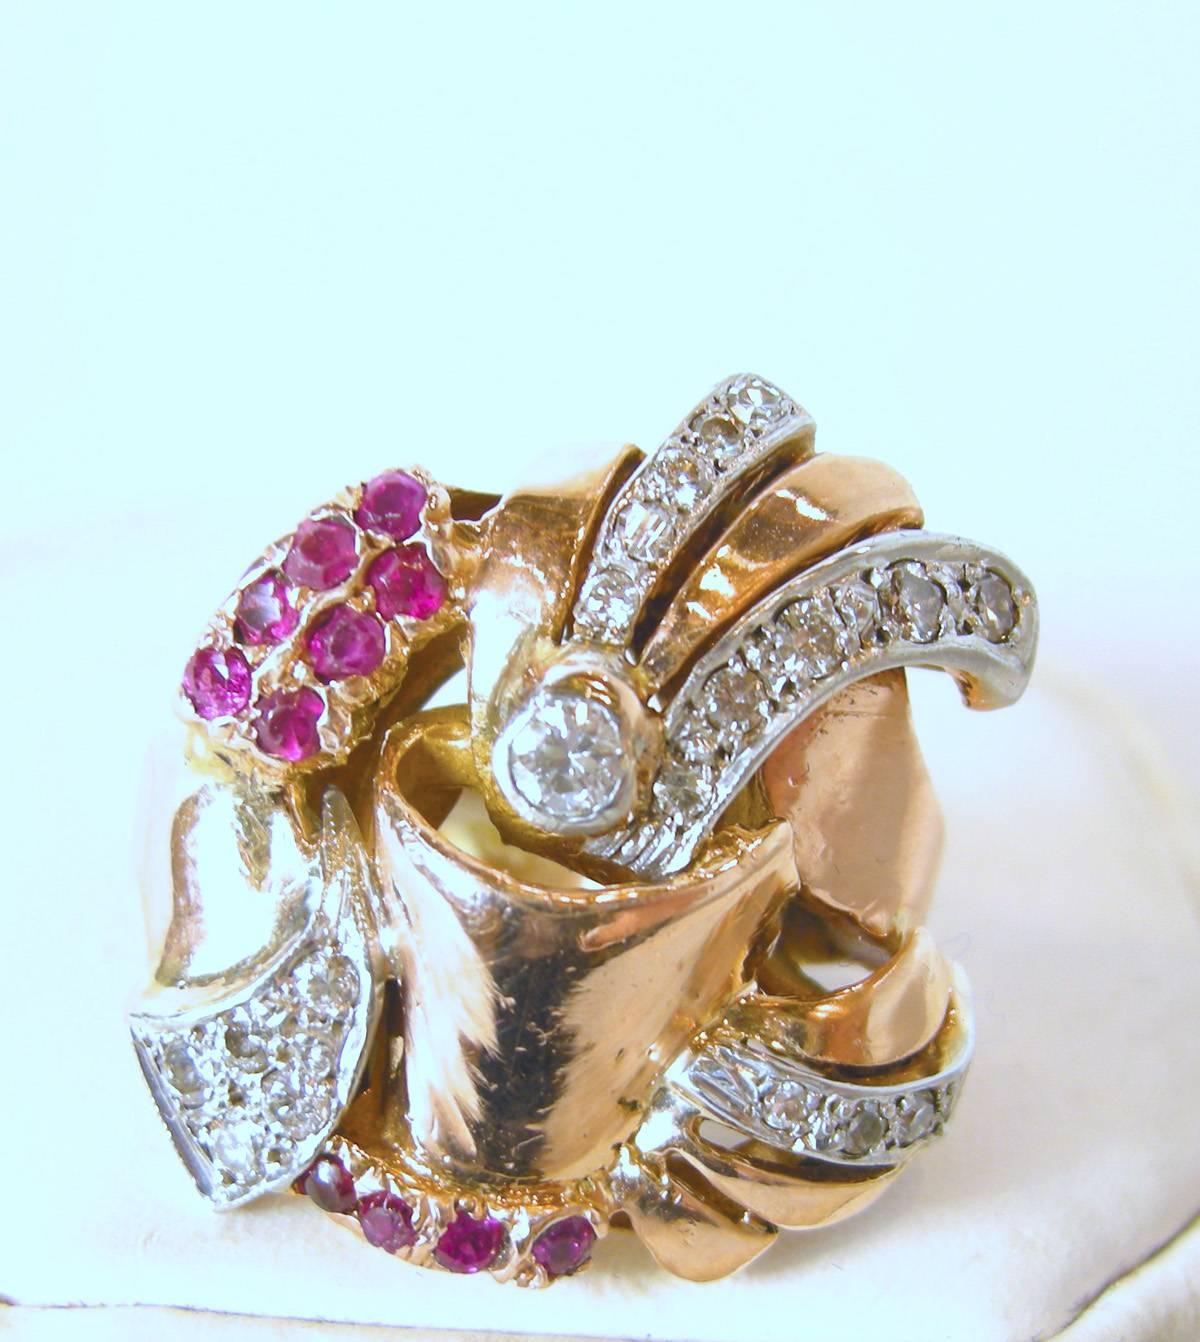 This one of the most unusual retro rings I have seen.  It is 14KT rose gold with approx. 1/2 carat of rubies on the bottom and sides.  It has approx. 1 carat of diamonds dispersed throughout the ring.  It measures 1-1/8” wide x 1” long.  It weighs